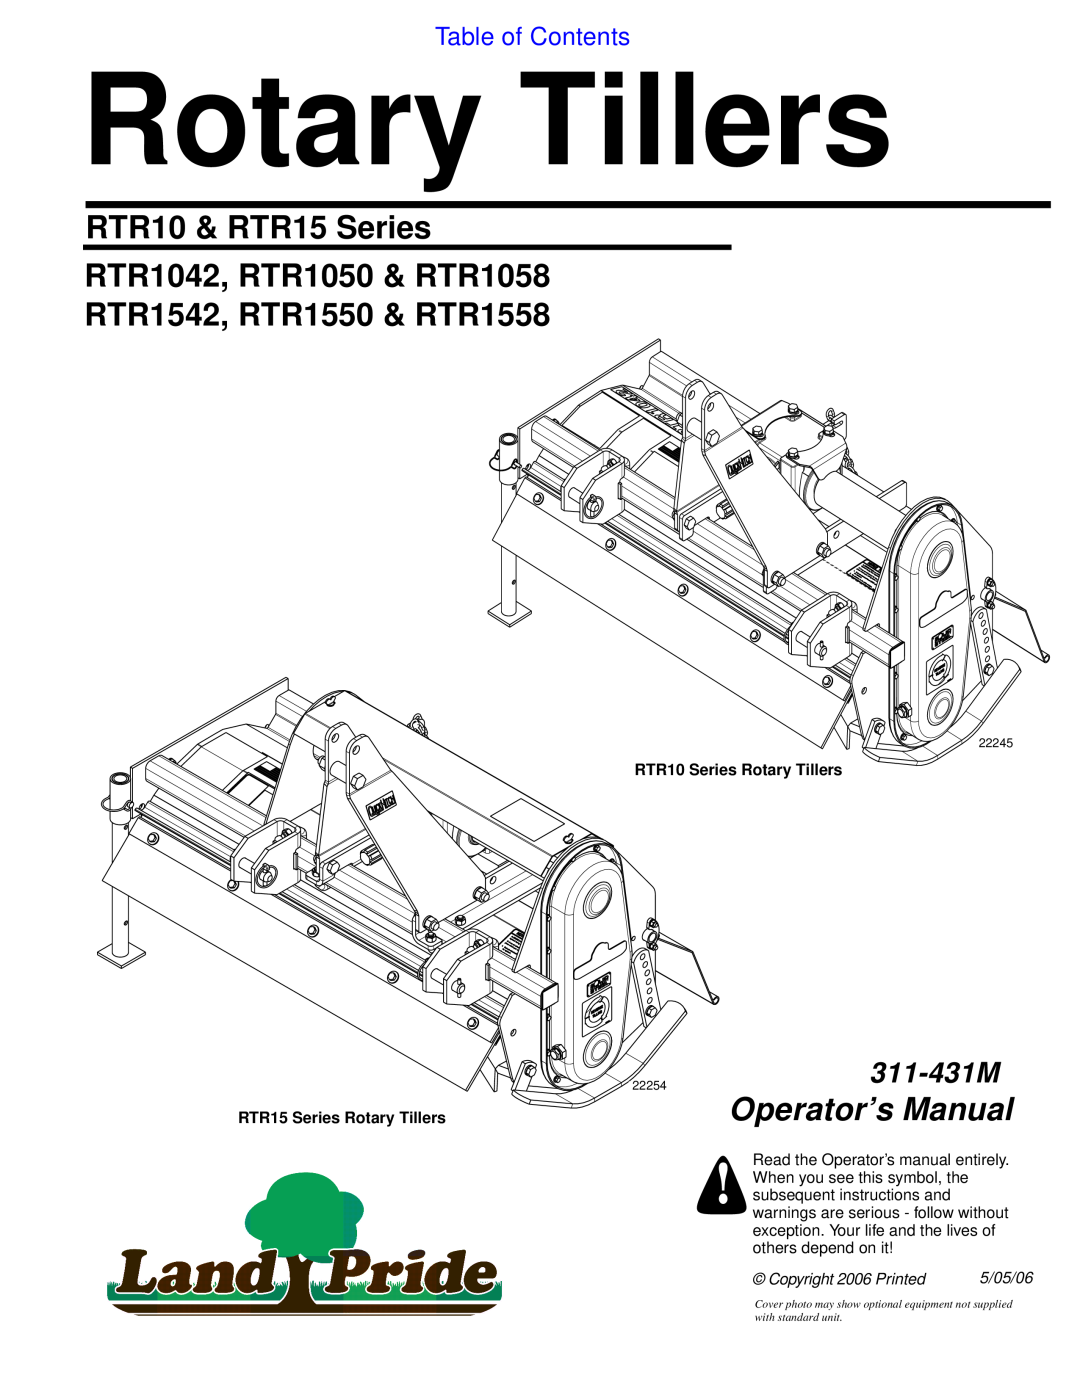 Land Pride manual Table of Contents, Rotary Tillers, RTR10 & RTR15 Series RTR1042, RTR1050 & RTR1058, Operator’s Manual 